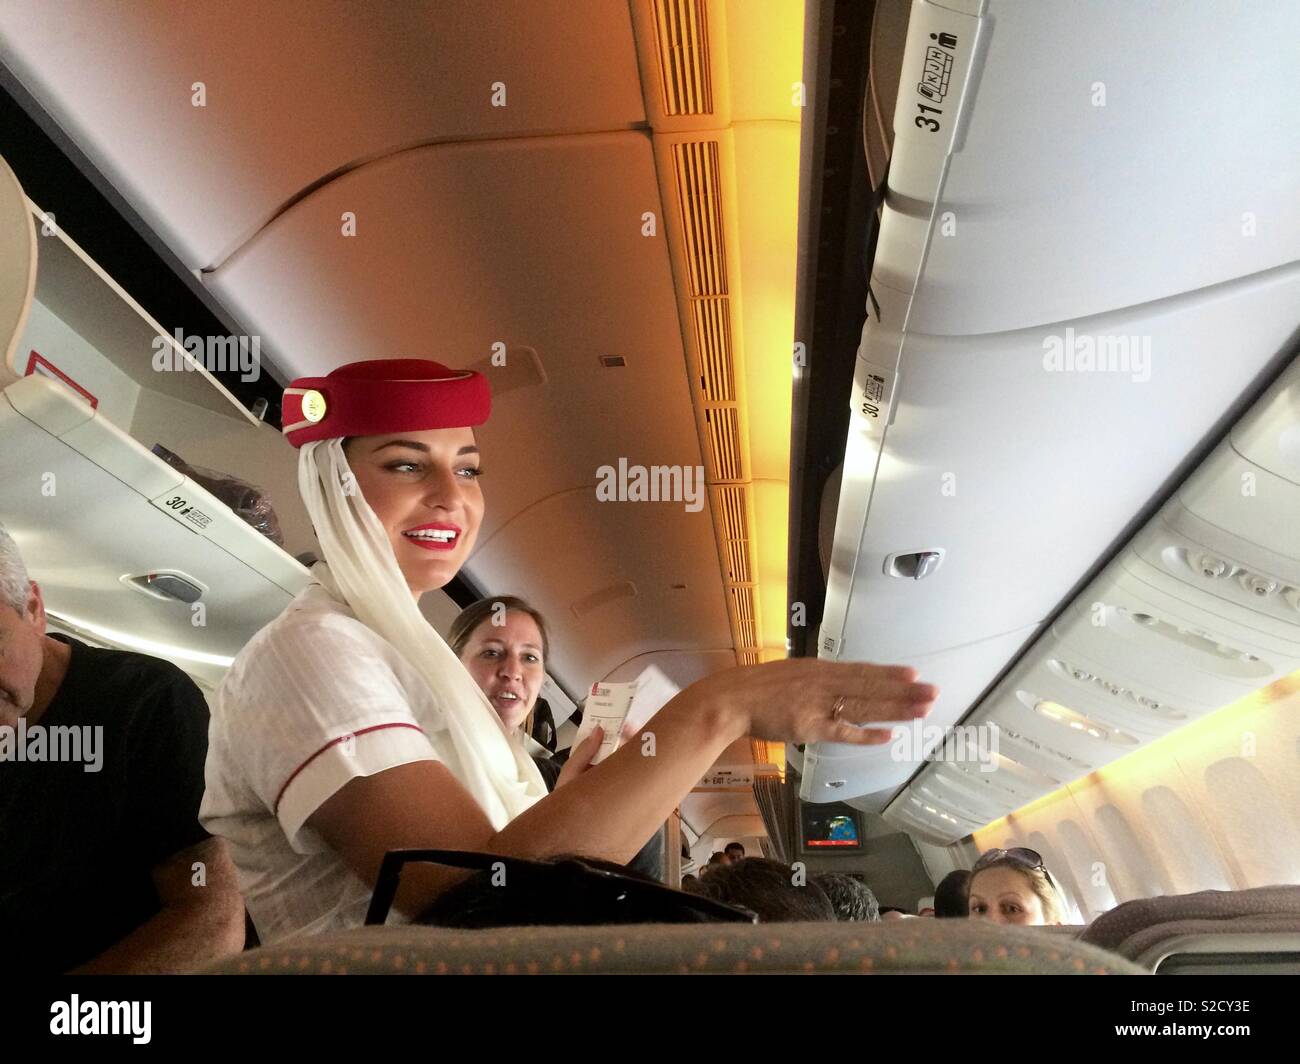 Emirates Airlines cabin crew assisting passengers in airplane before takeoff of aircraft Stock Photo